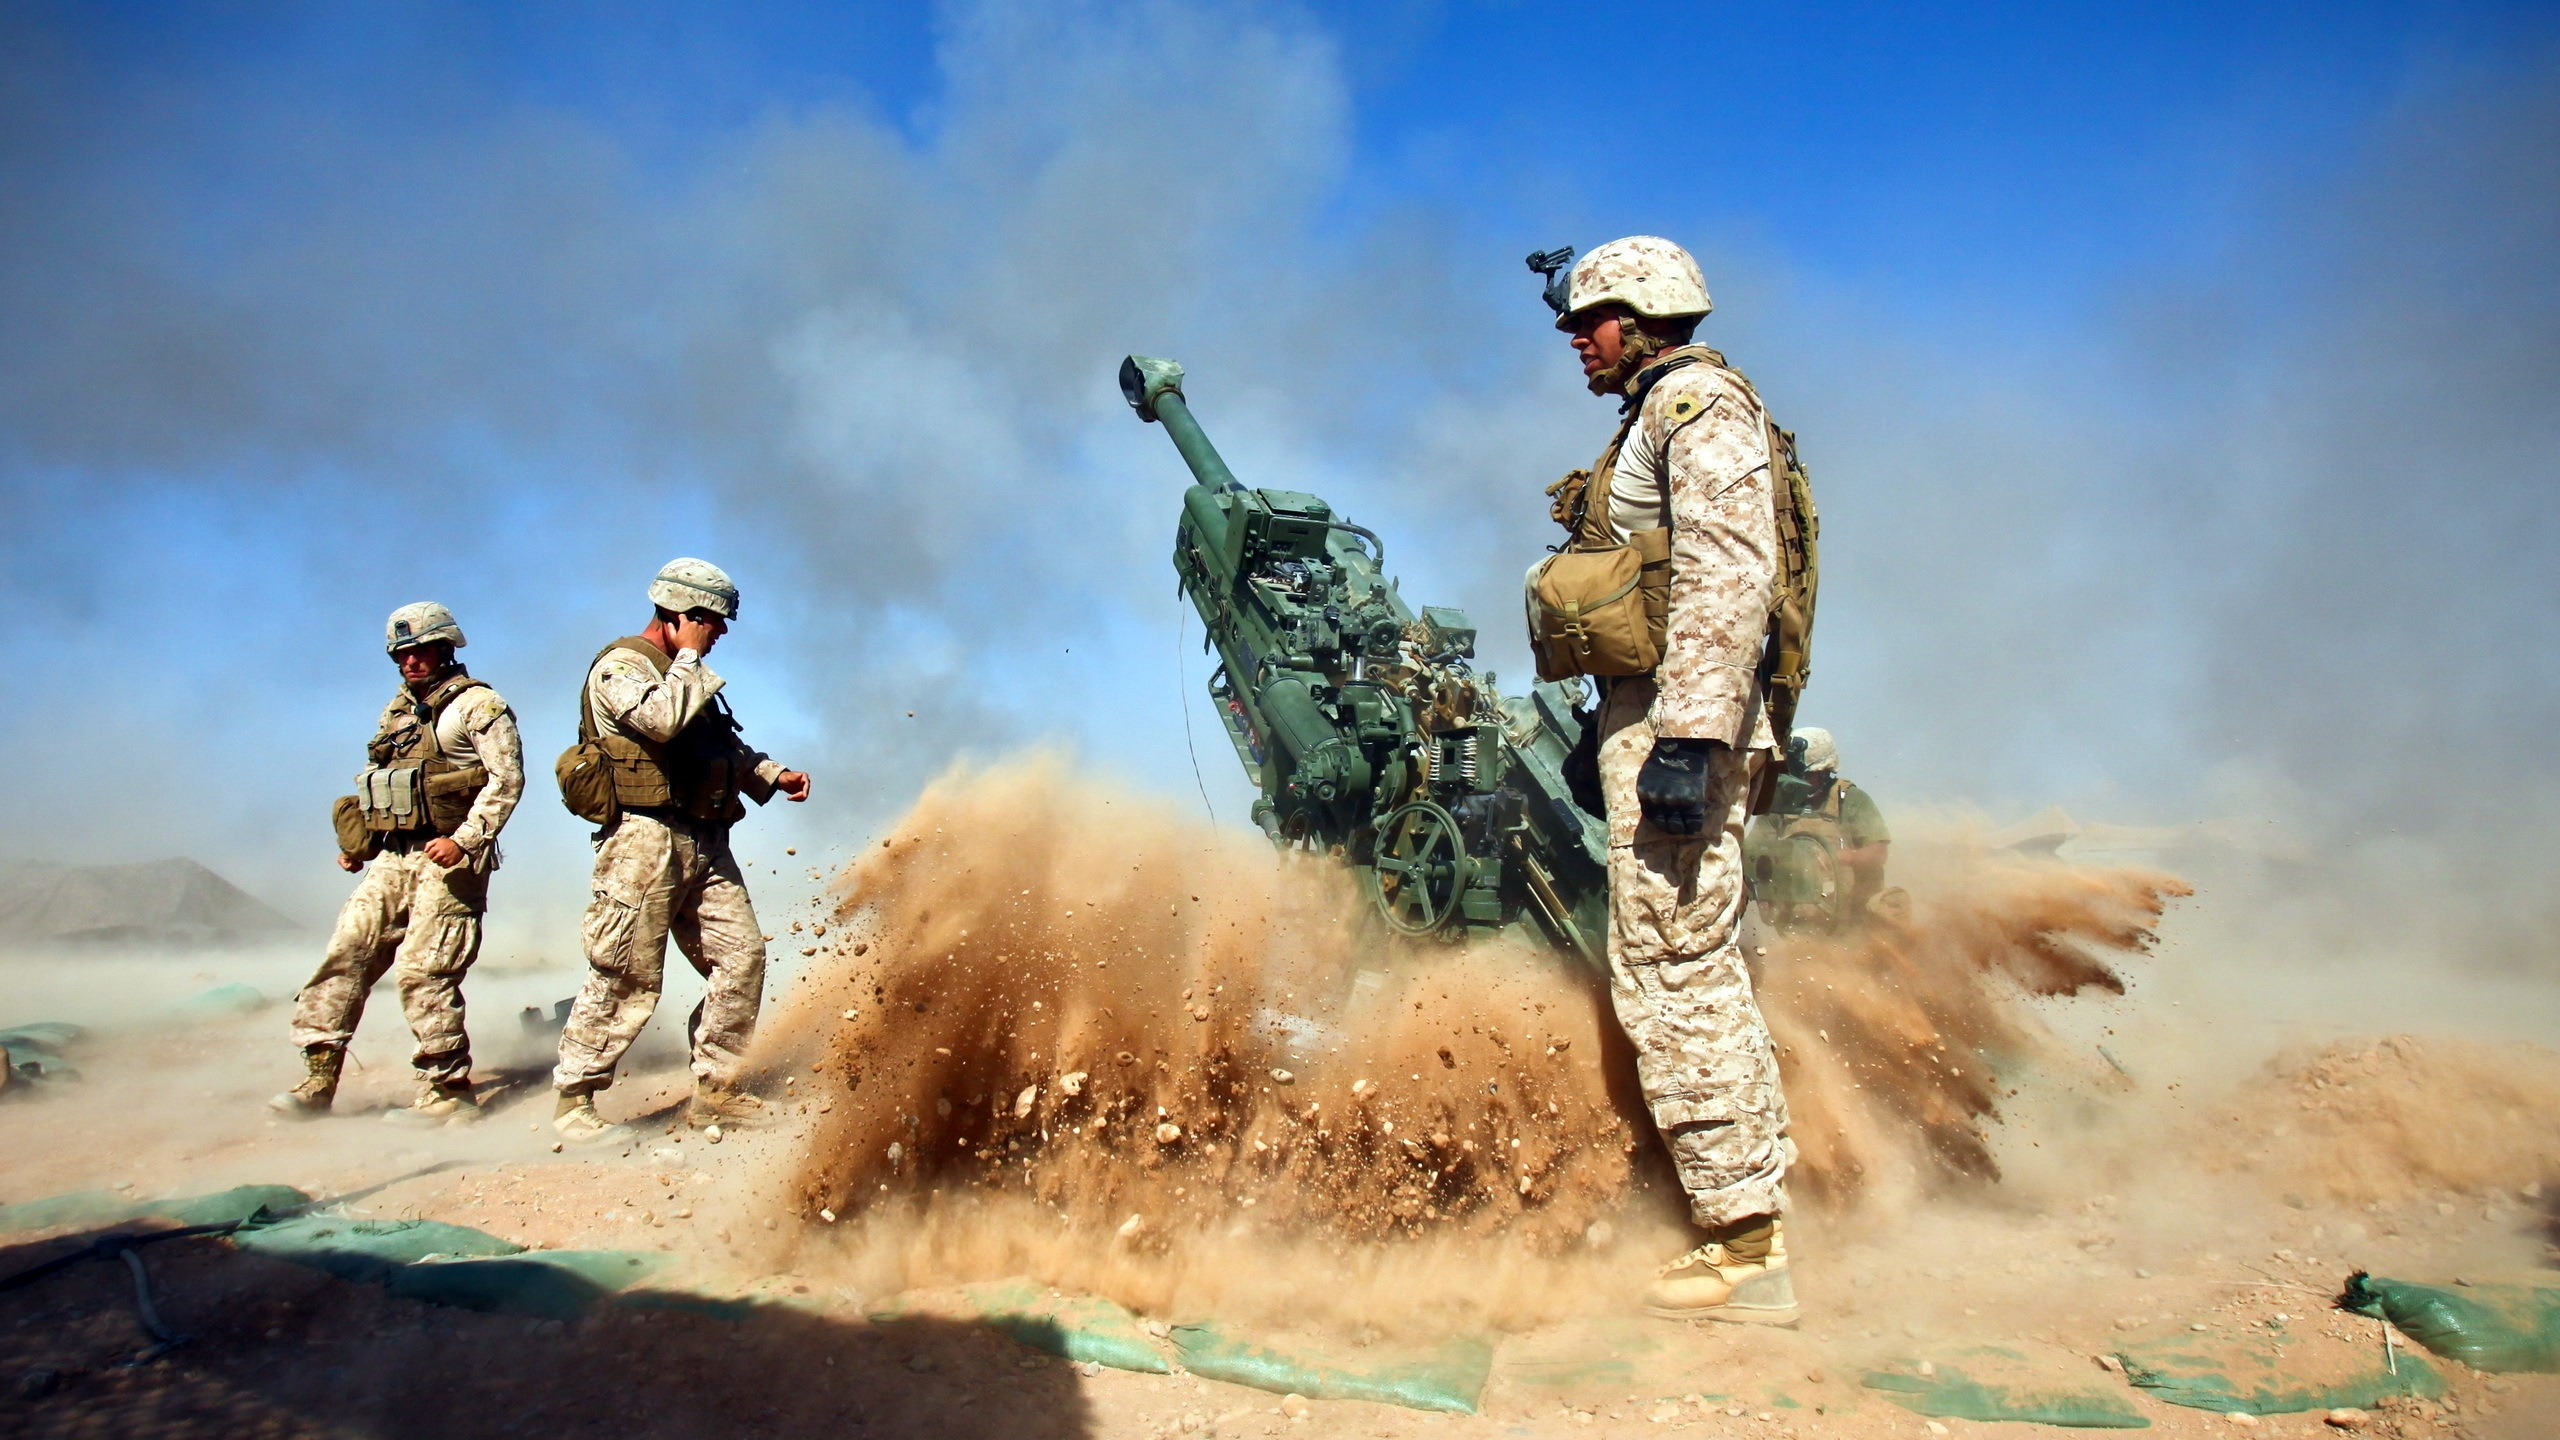 Howitzer and Soldiers for 2560x1440 HDTV resolution